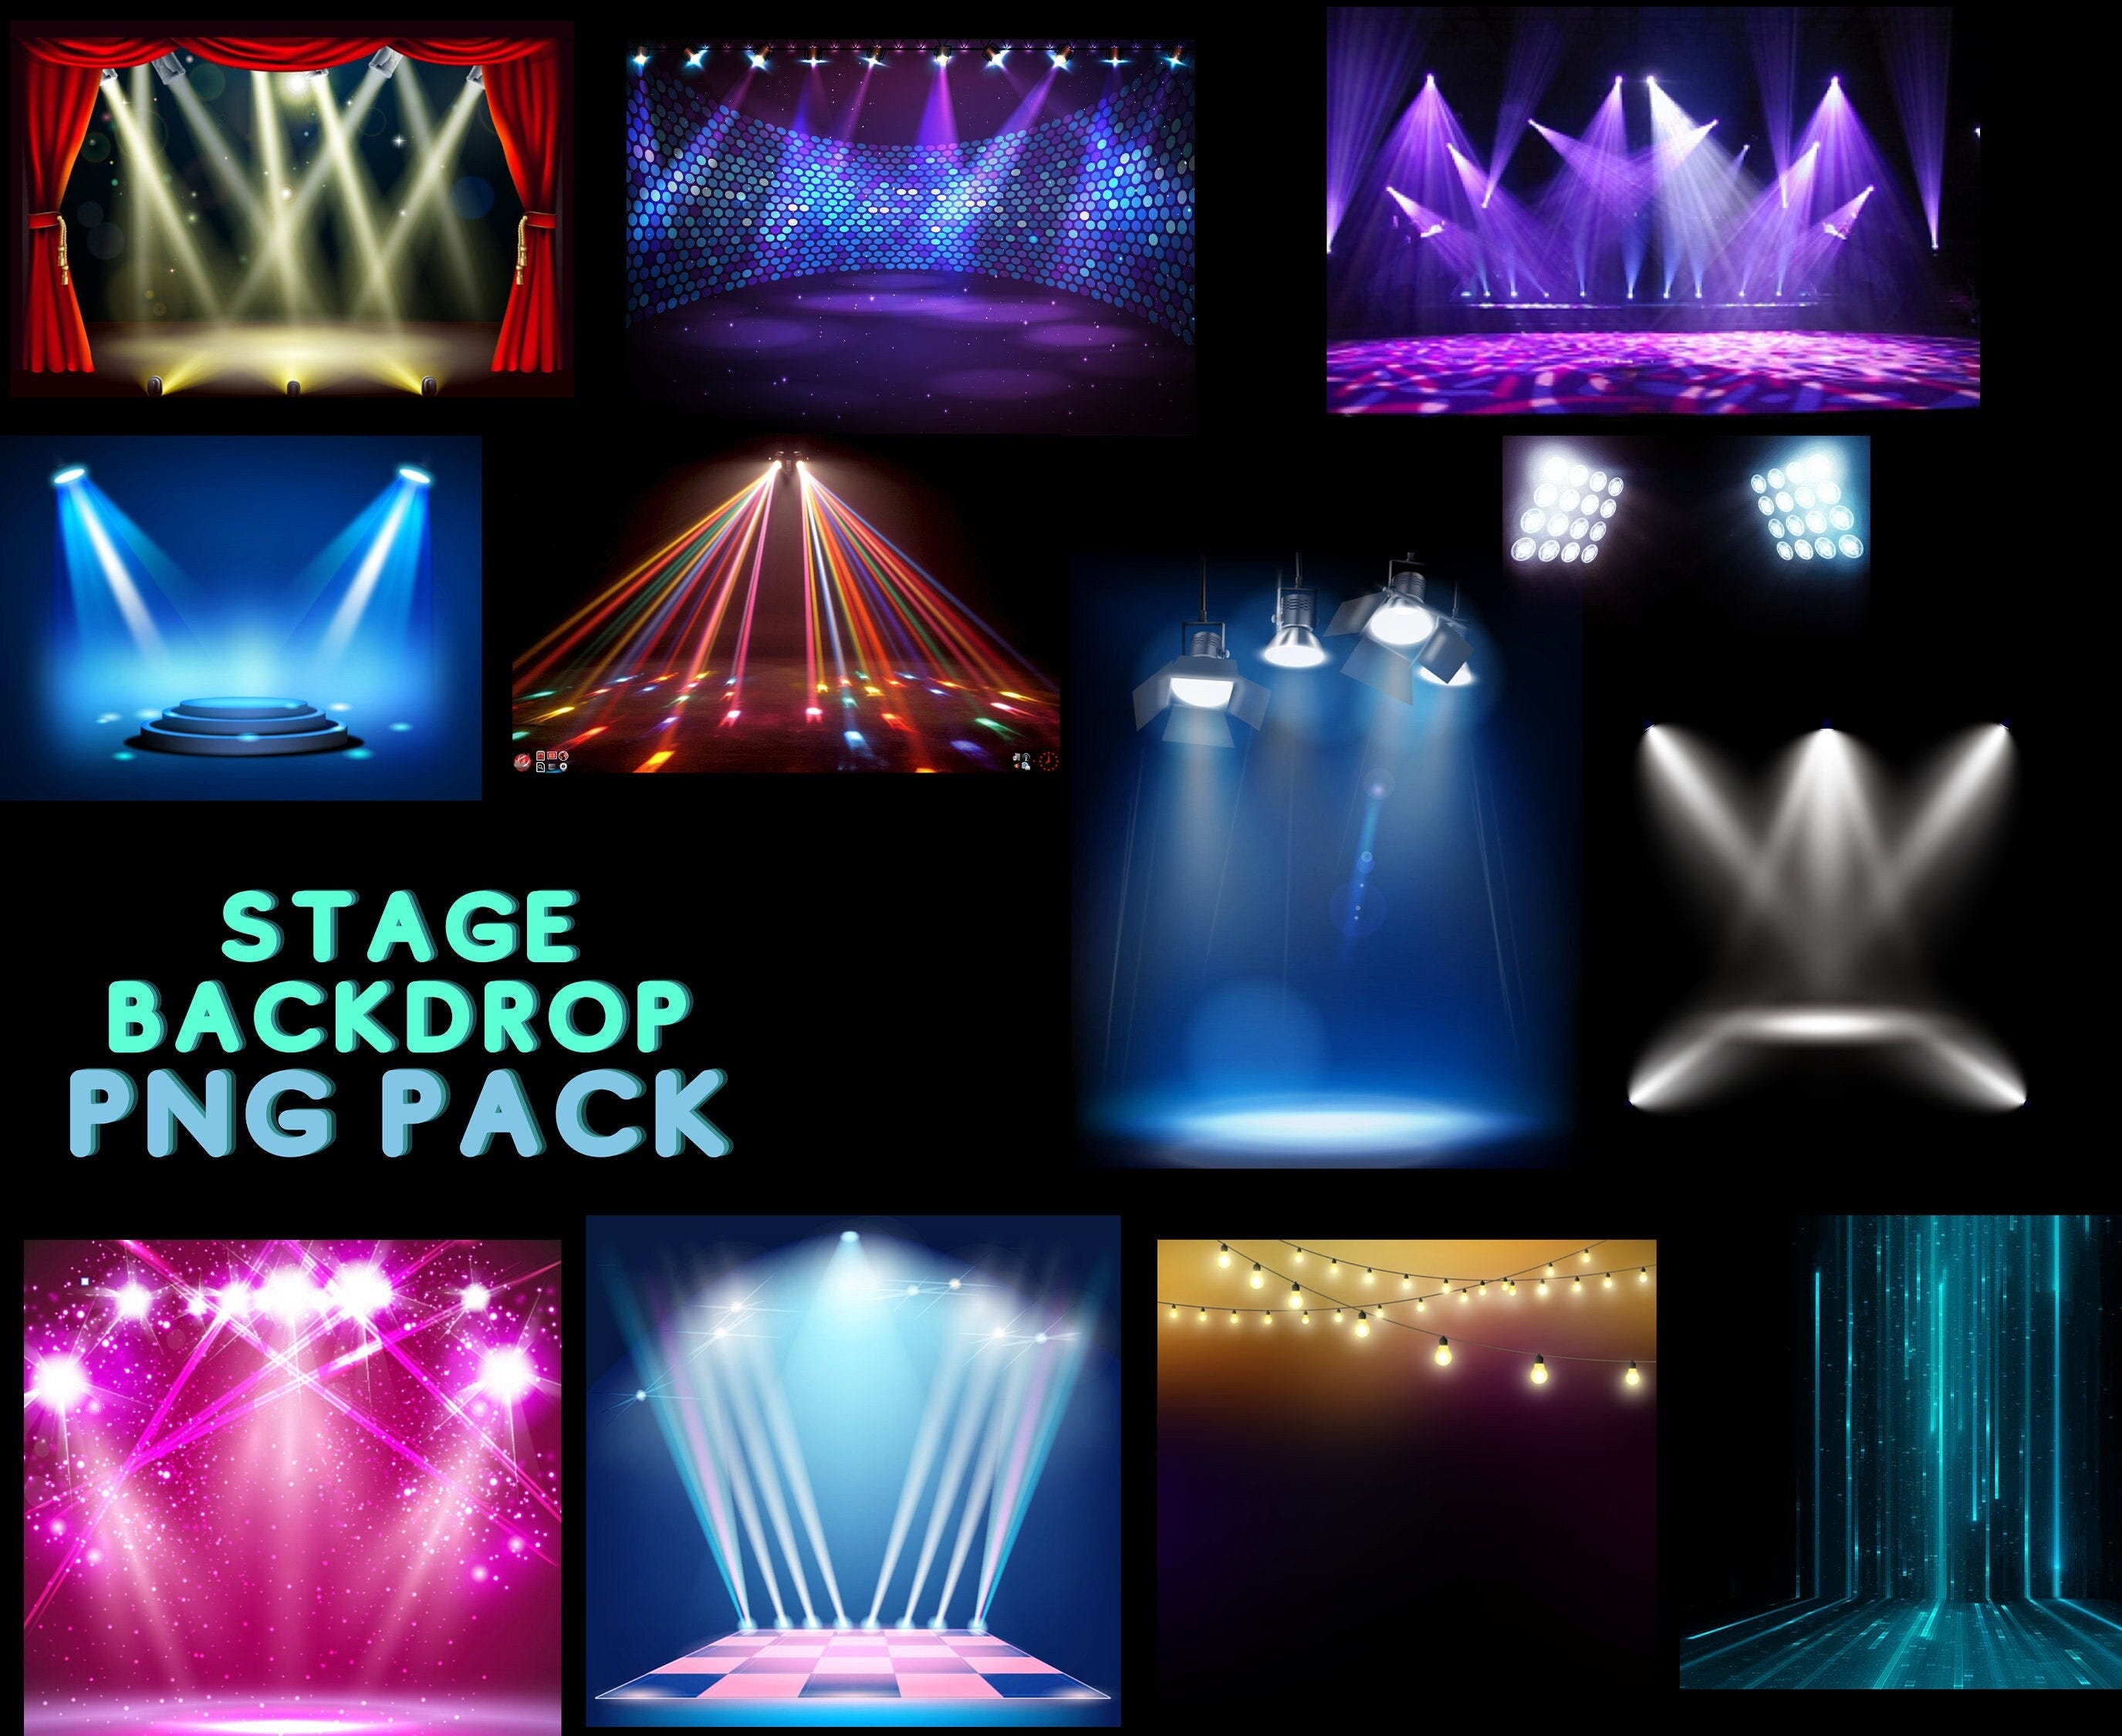 Stage Lighted Backdrops Clip Art PNG. Digital Downloads/20 FREE Bonus Files Incl/ Stage Backdrops/Lighted  Frames and Backgrounds for Photos